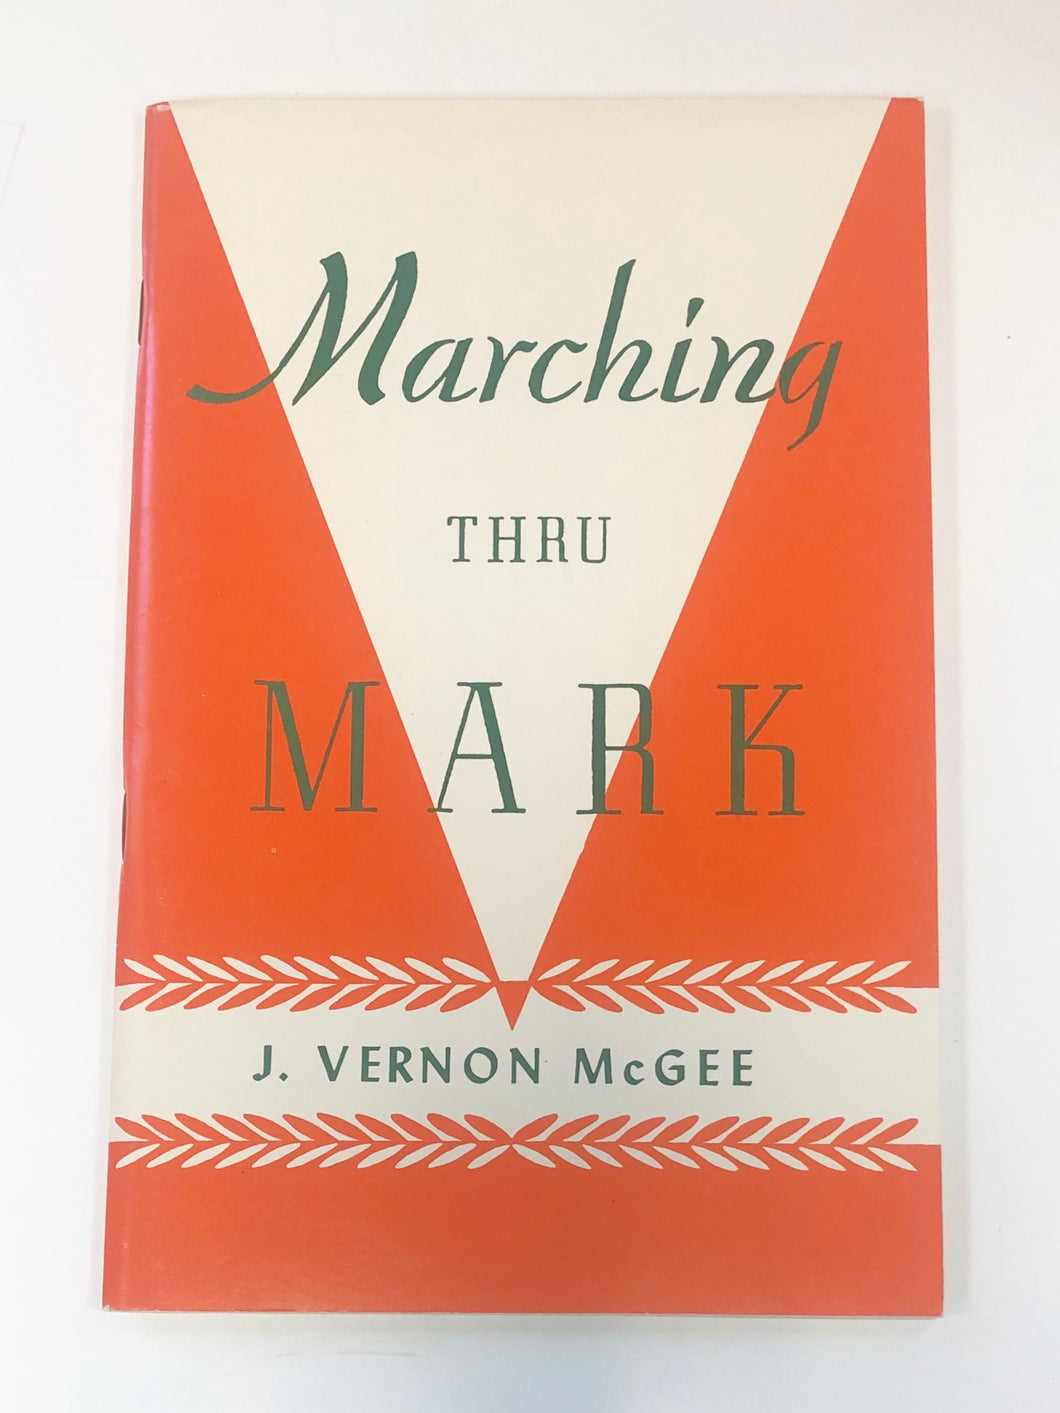 Marching Through Mark by J. Vernon McGee